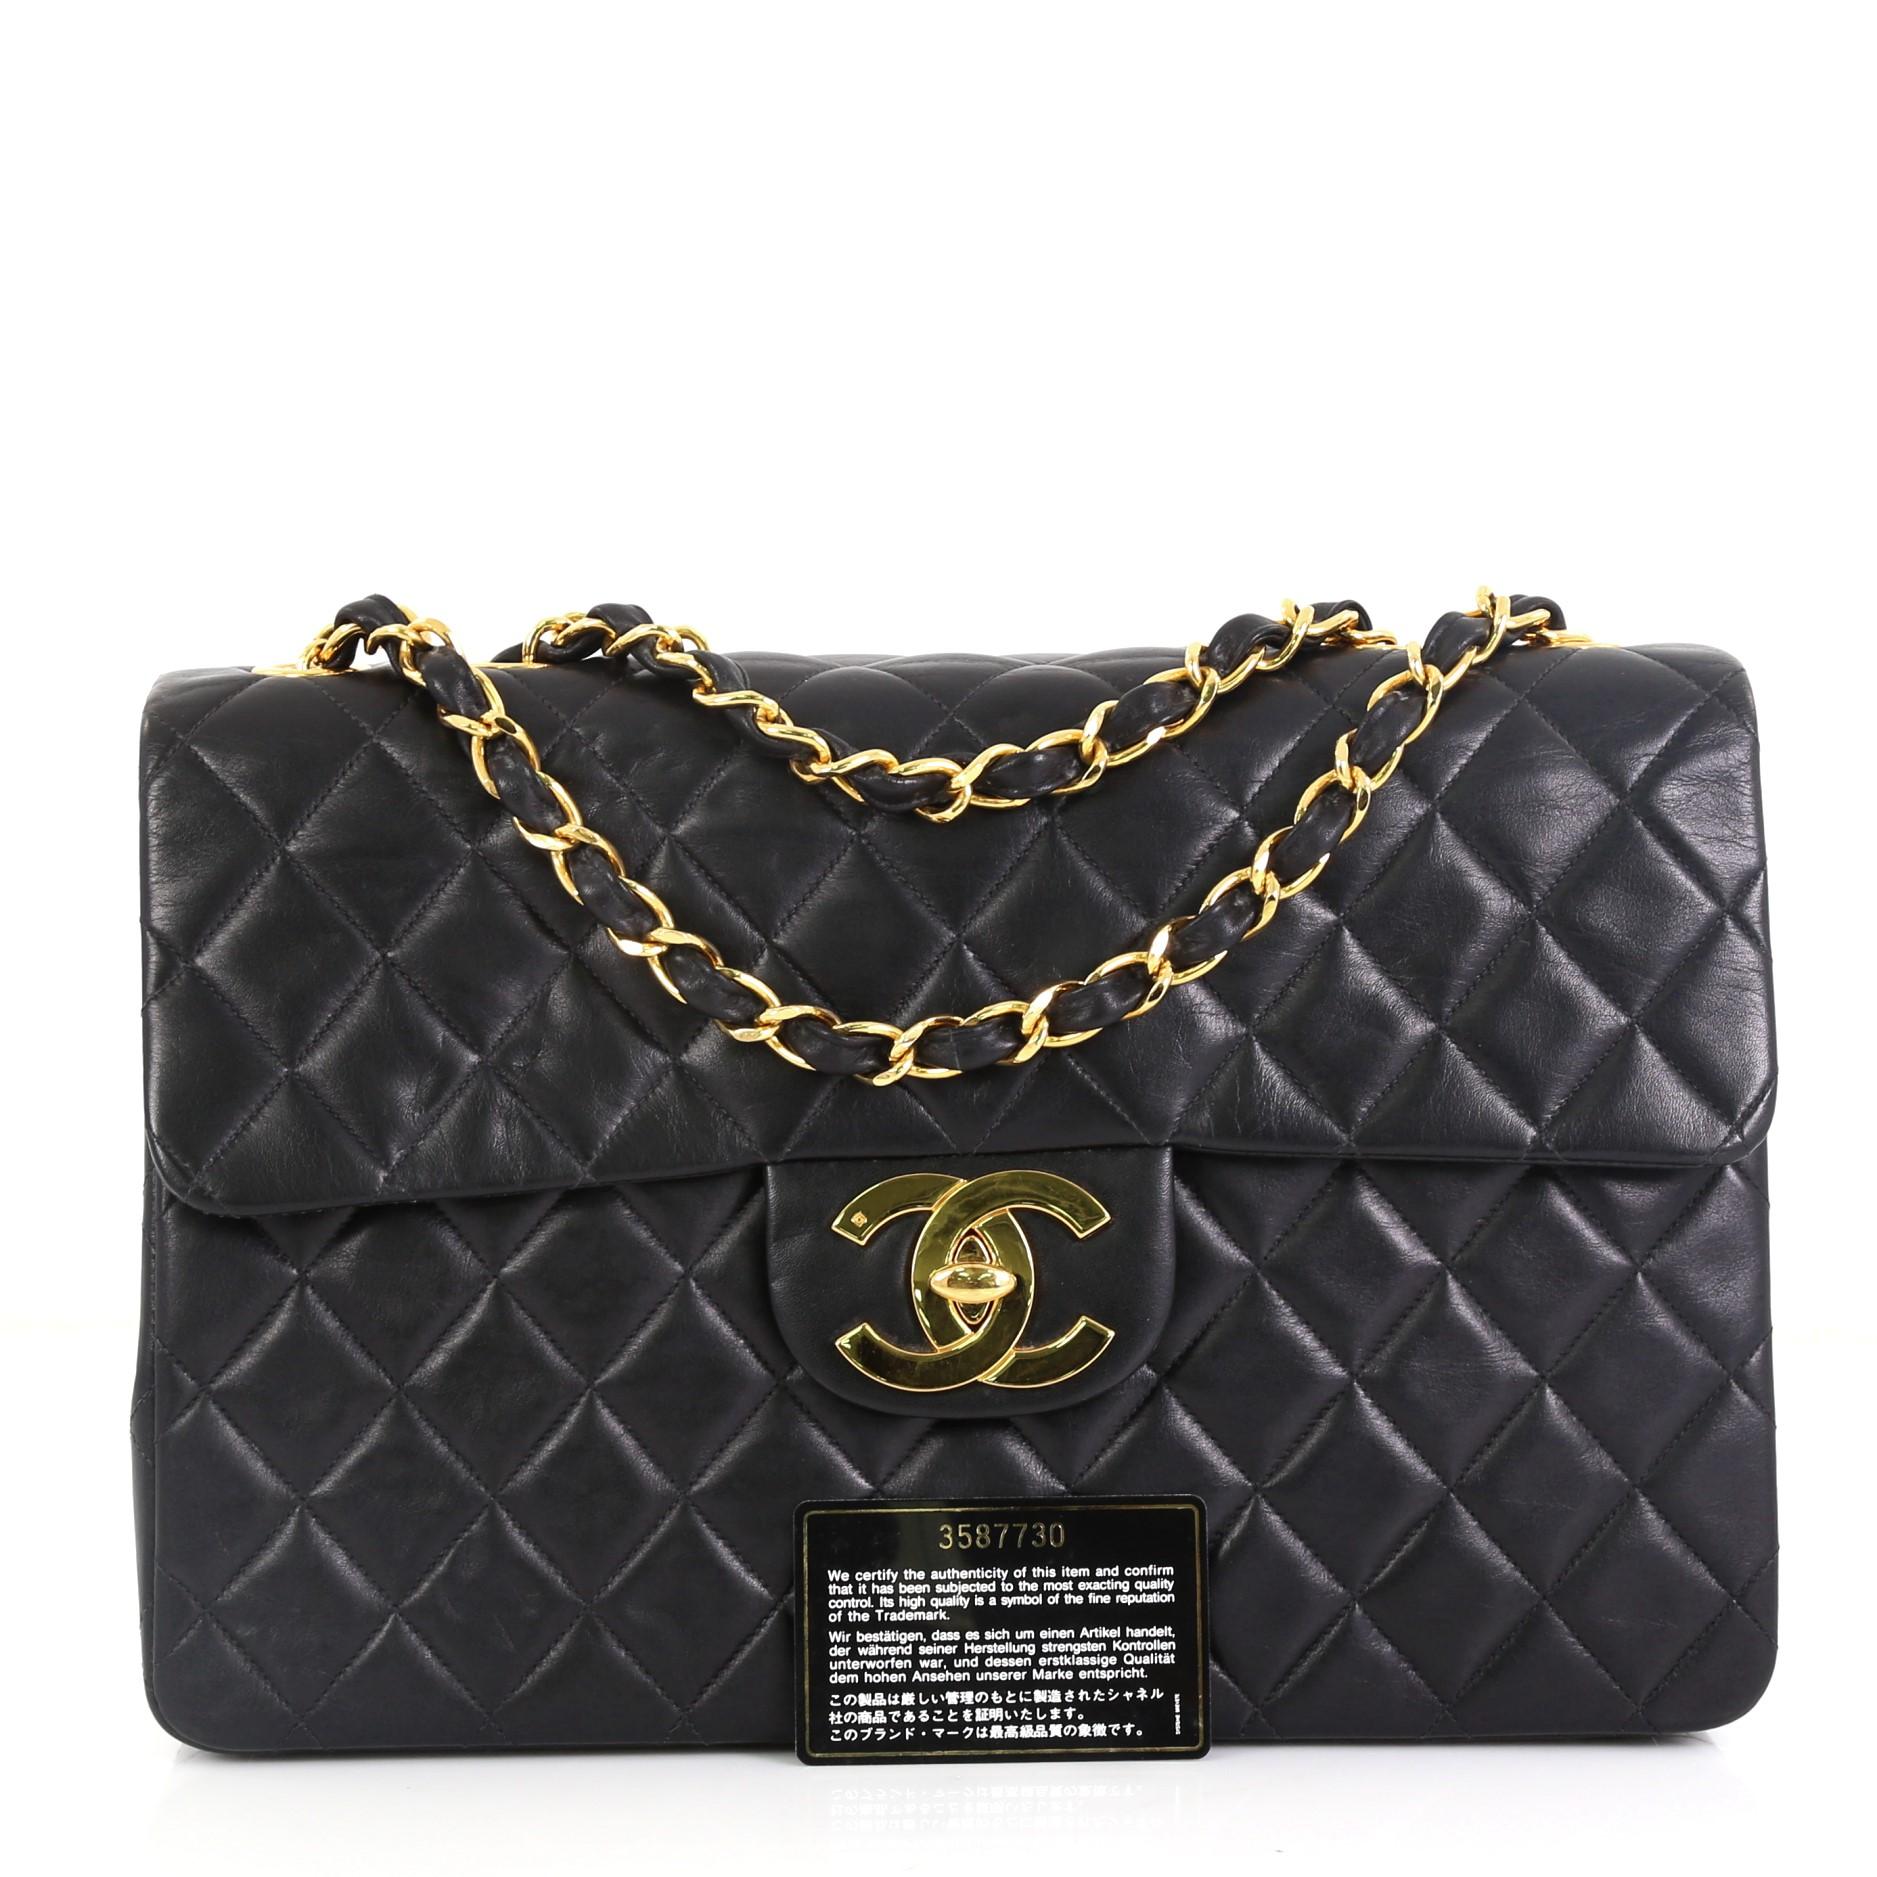 This Chanel Vintage Classic Single Flap Bag Quilted Lambskin Maxi, crafted in black quilted lambskin, features woven-in leather chain link straps, exterior back slip pocket, and gold-tone hardware. Its CC turn-lock closure opens to a red leather